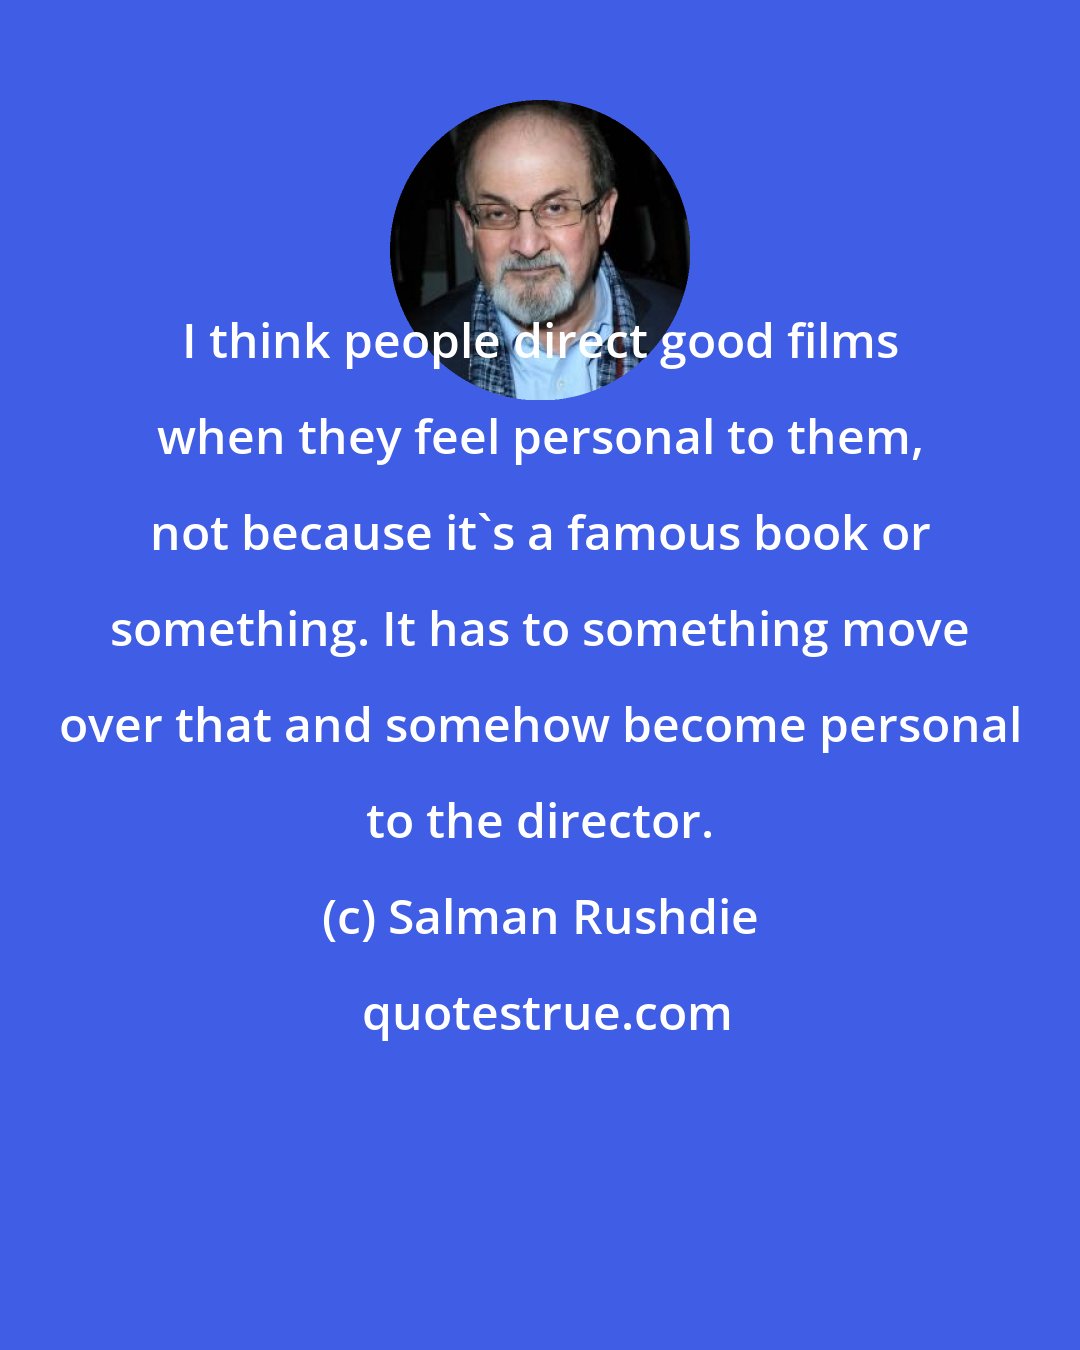 Salman Rushdie: I think people direct good films when they feel personal to them, not because it's a famous book or something. It has to something move over that and somehow become personal to the director.